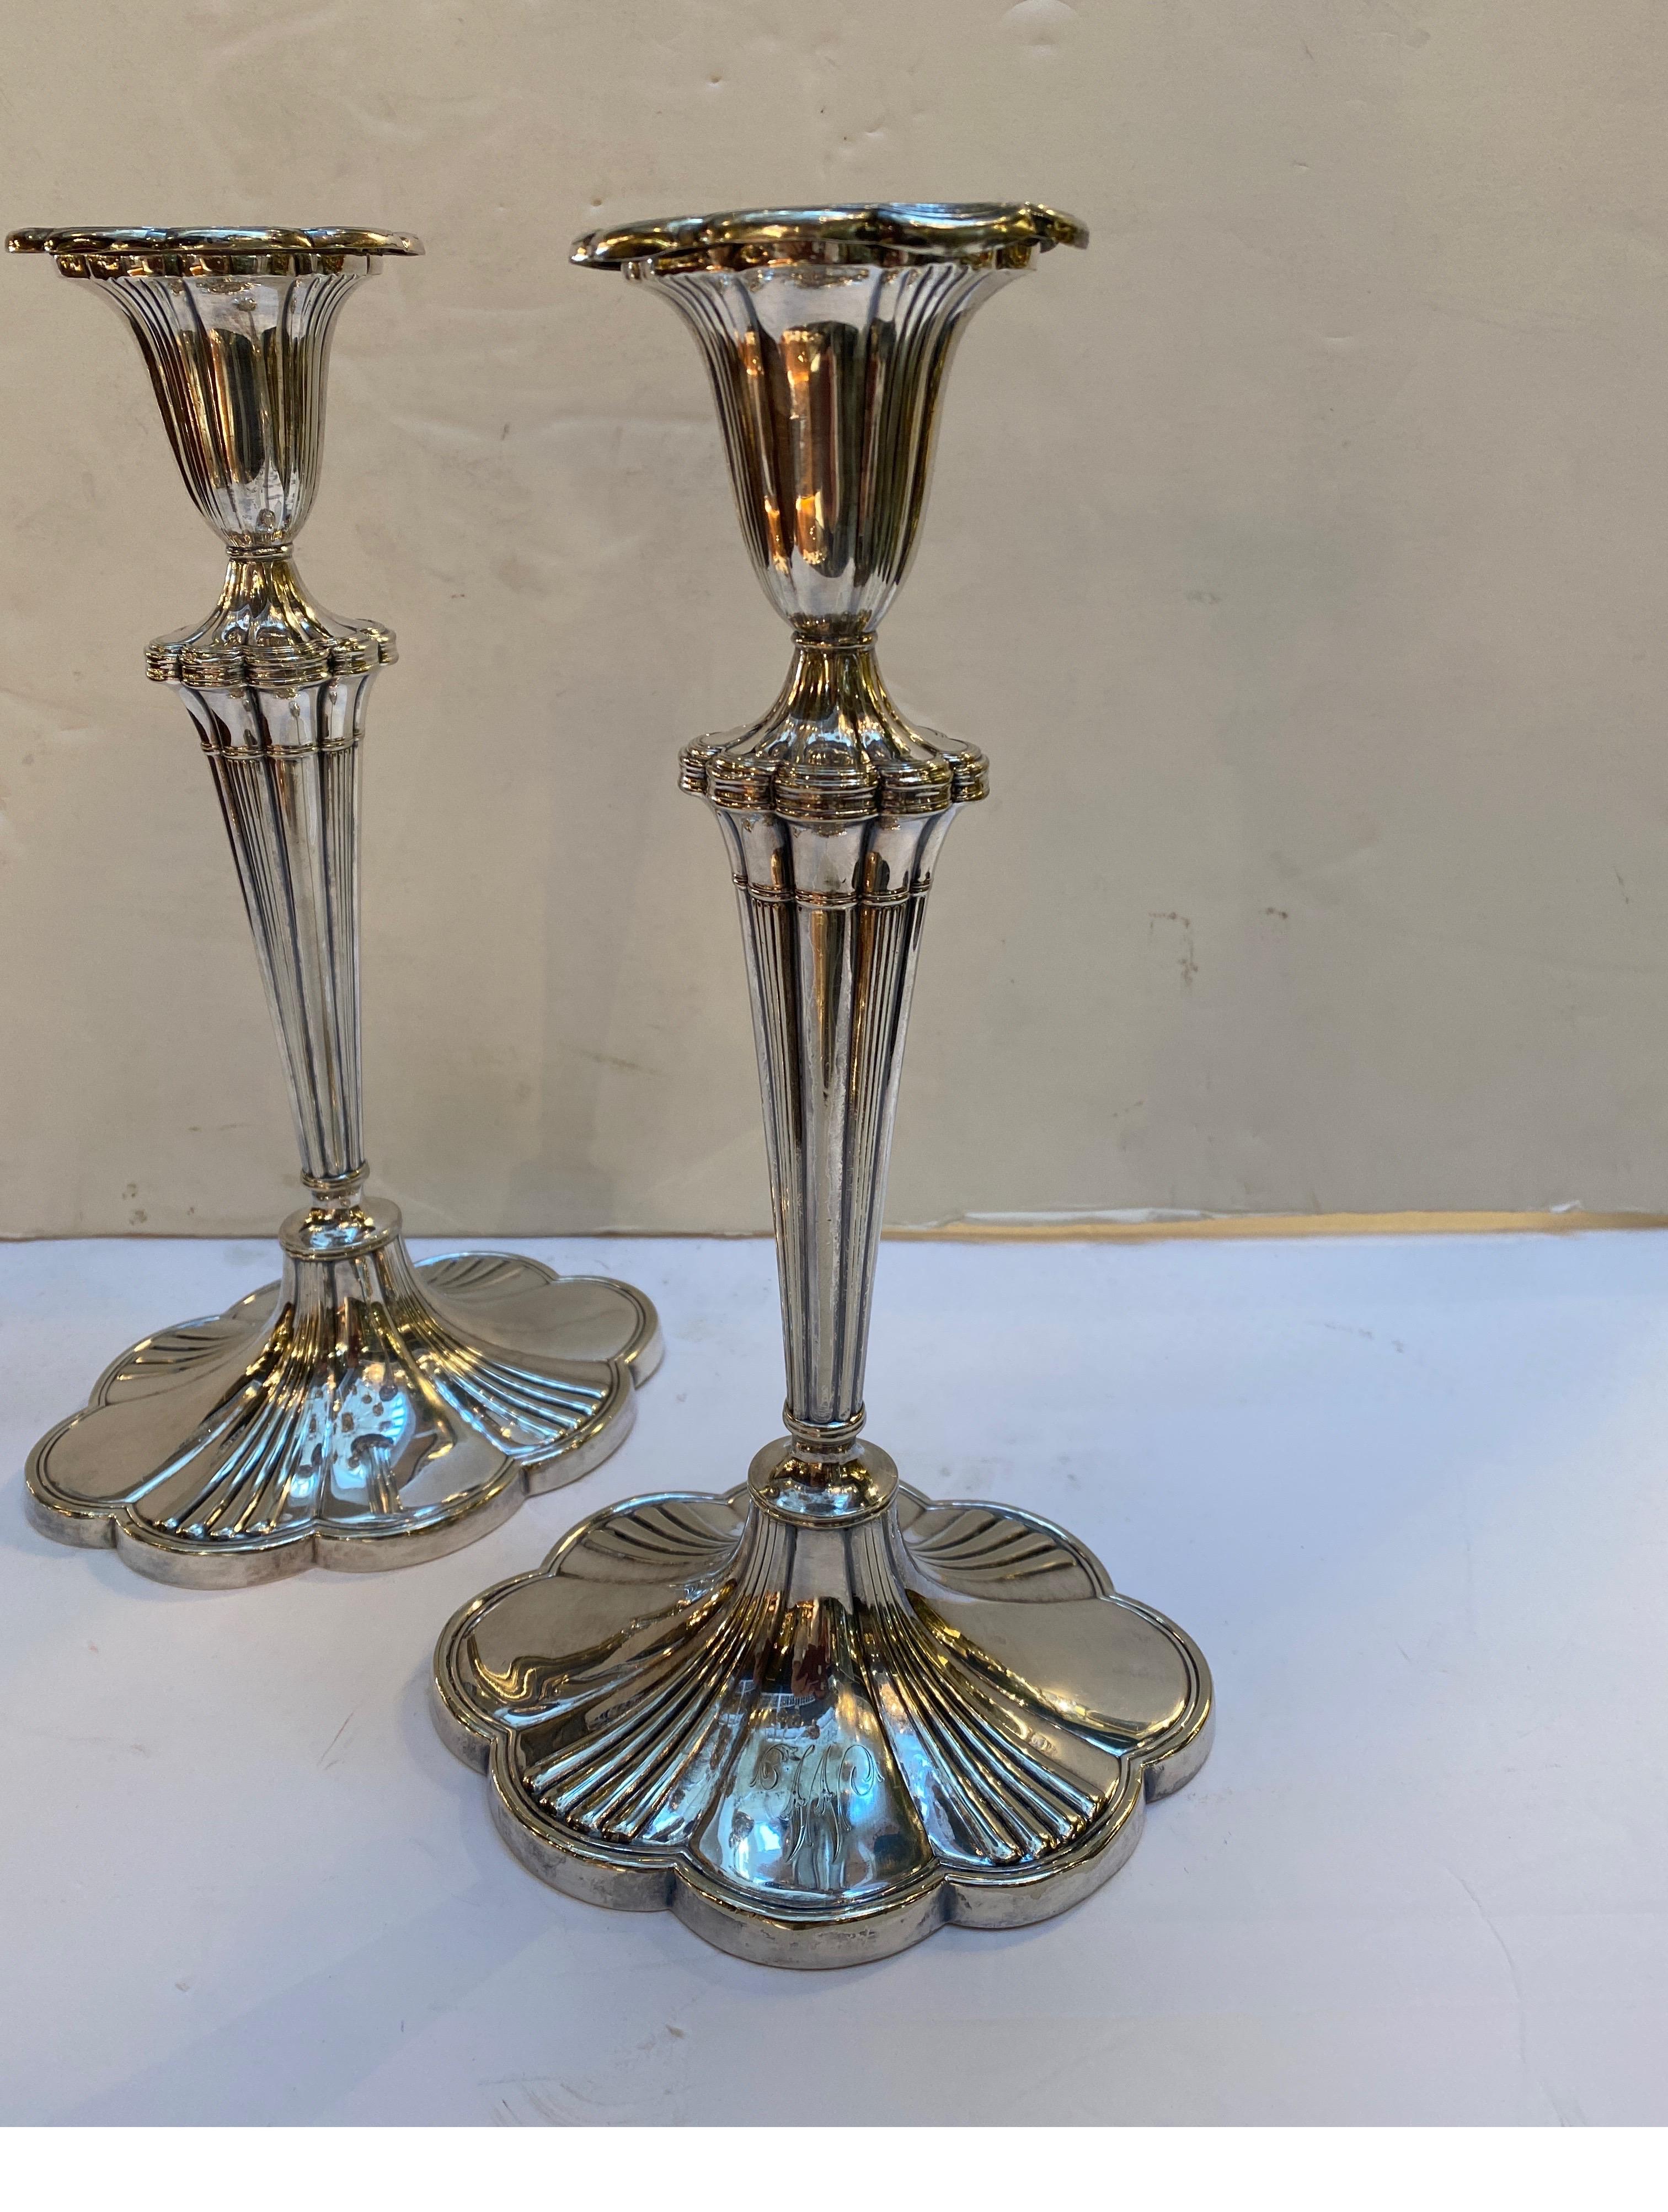 A Pair of elegant lobed candlesticks made by Gorham, year mark 1914. The graceful form with original bobech at the top with tapering ribbed center column with a scalloped base, light free hand engraved Initial W.  11 Inces Tall